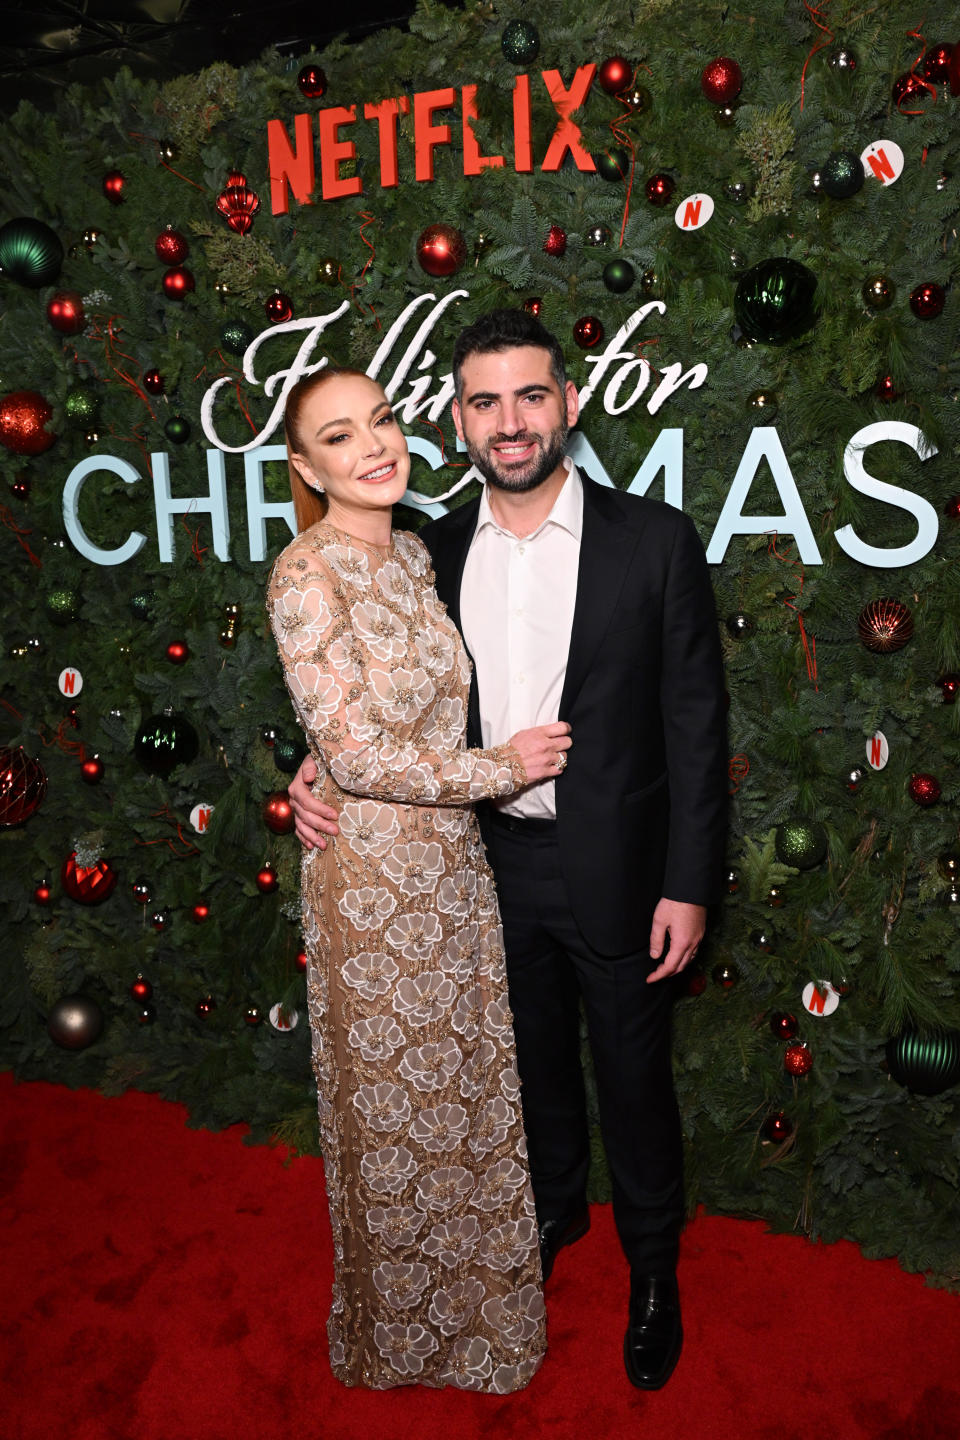 NEW YORK, NEW YORK - NOVEMBER 09: Lindsay Lohan and Bader Shammas attend Netflix’s Falling For Christmas Celebratory Holiday Fan Screening with Cast & Crew on November 9, 2022 in New York City (Photo by Bryan Bedder/Getty Images for Netflix)